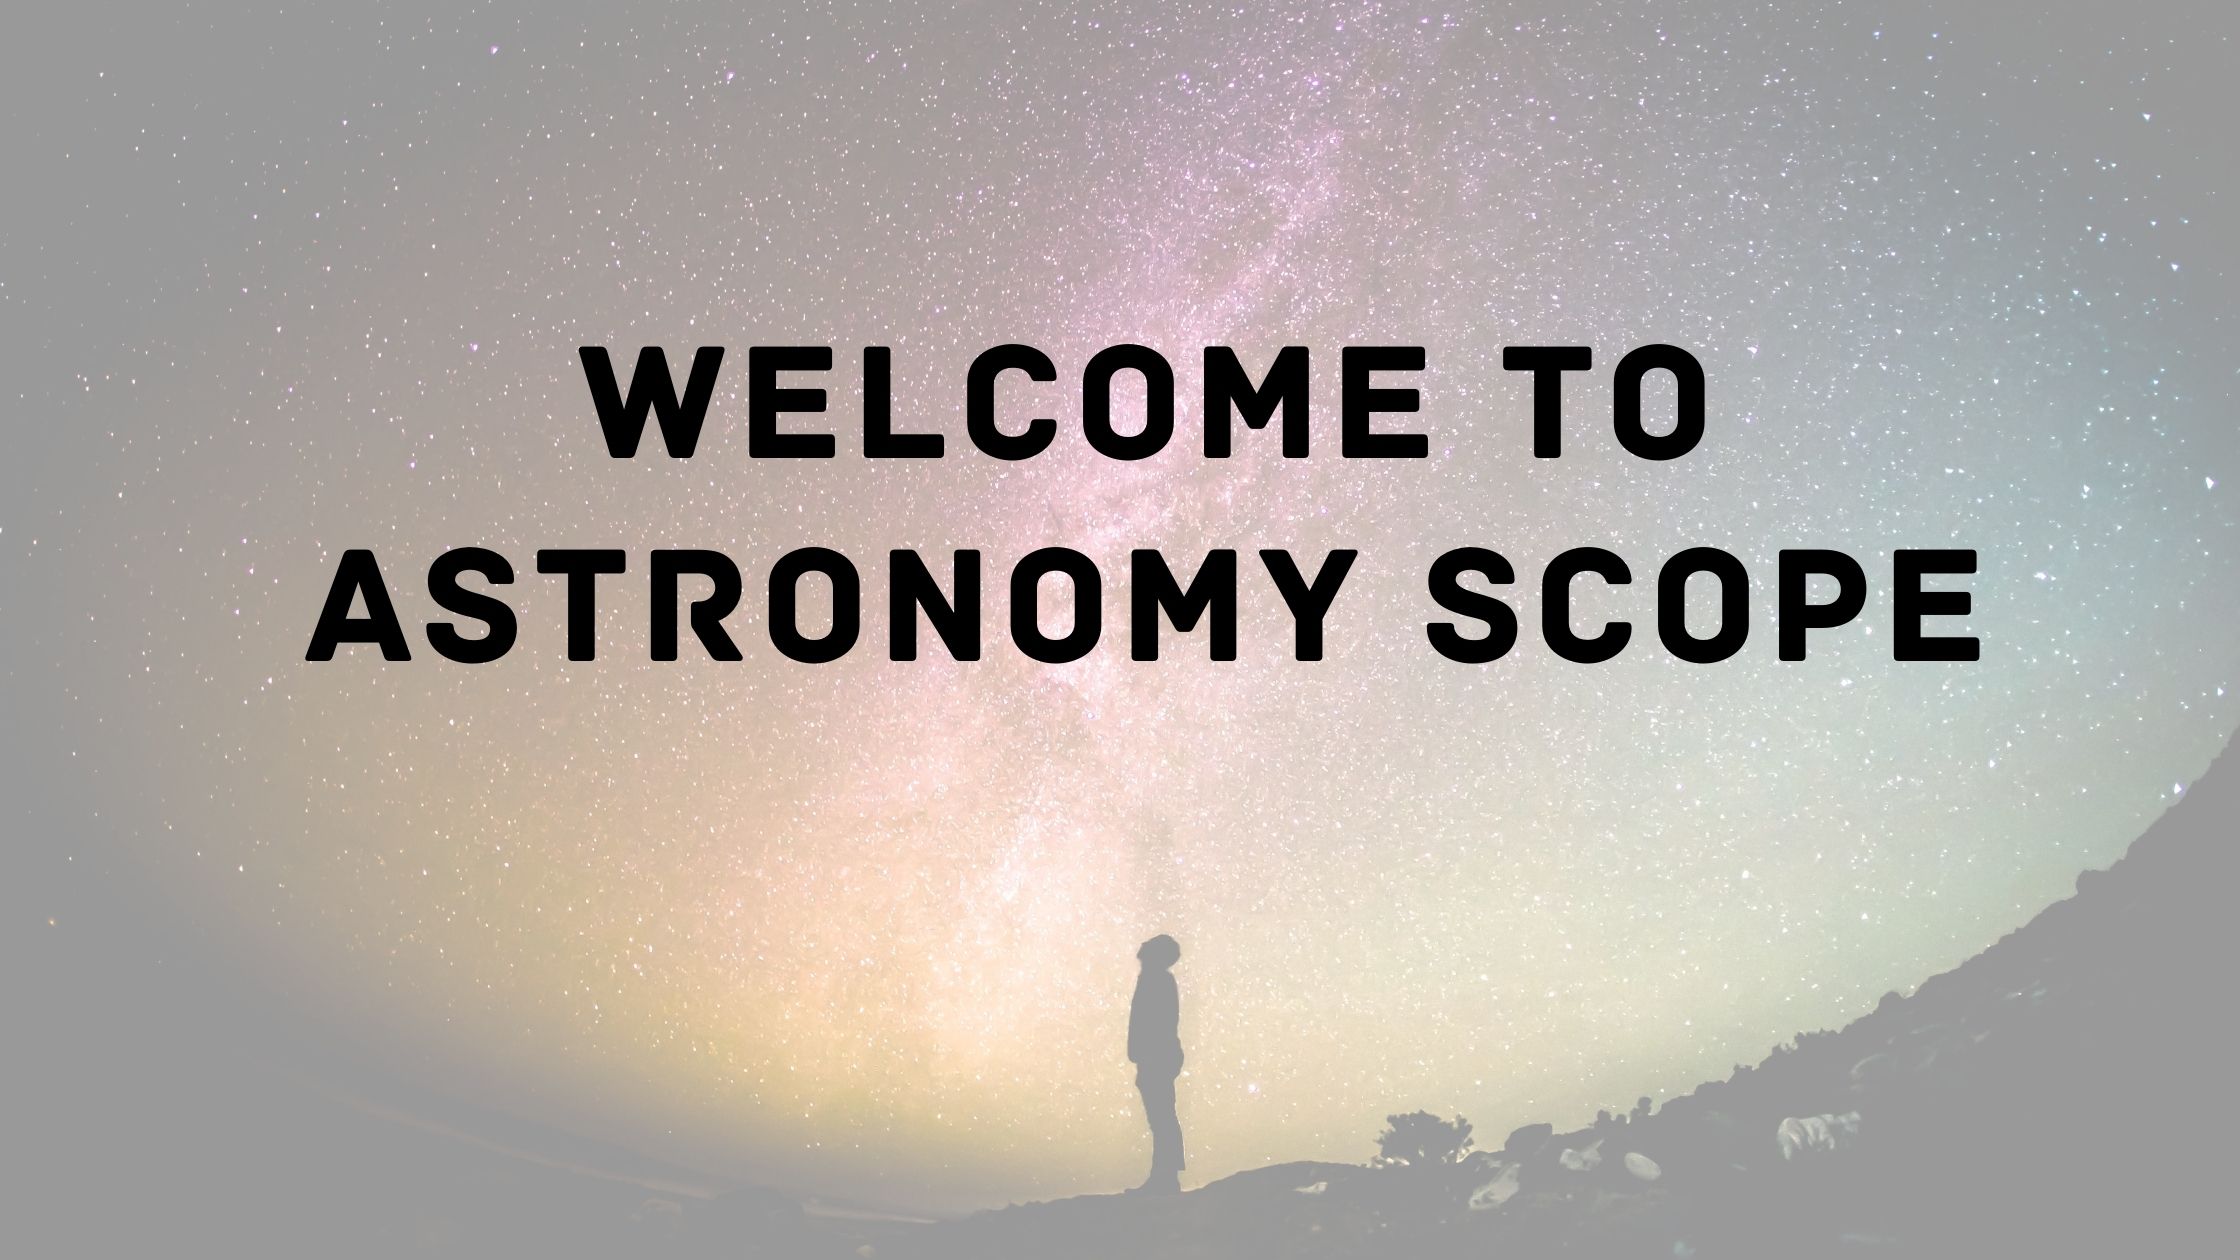 Welcome to Astronomy Scope (1)